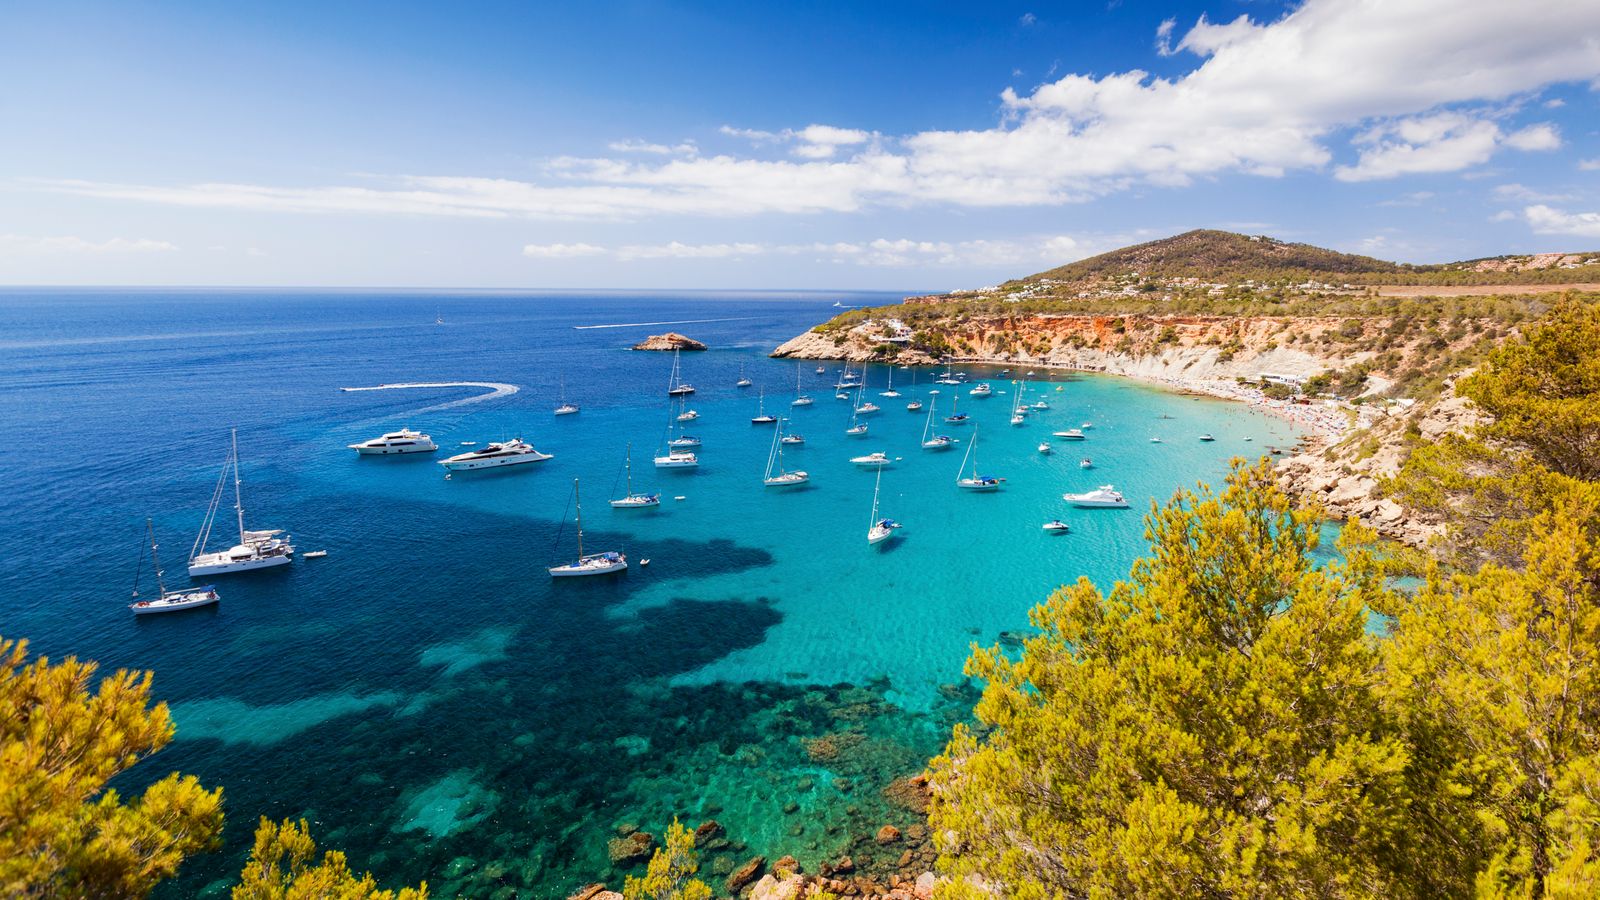 Dengue fever cases in Ibiza prompts warning to tourists from Spanish health officials